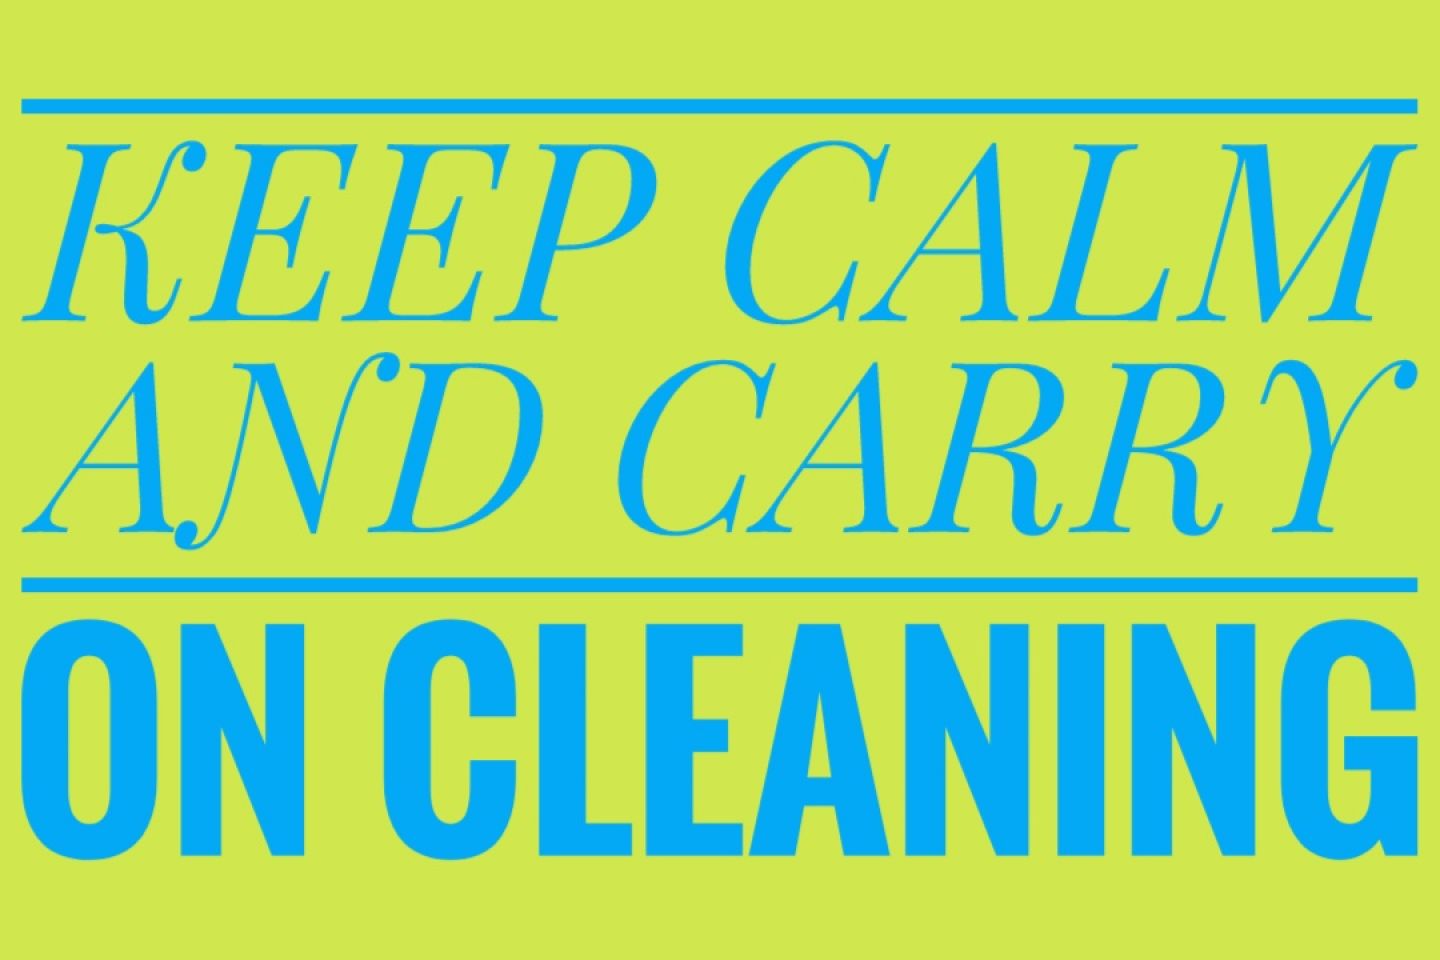 Keep Calm and Carry On... Cleaning at Gentle Dental practice